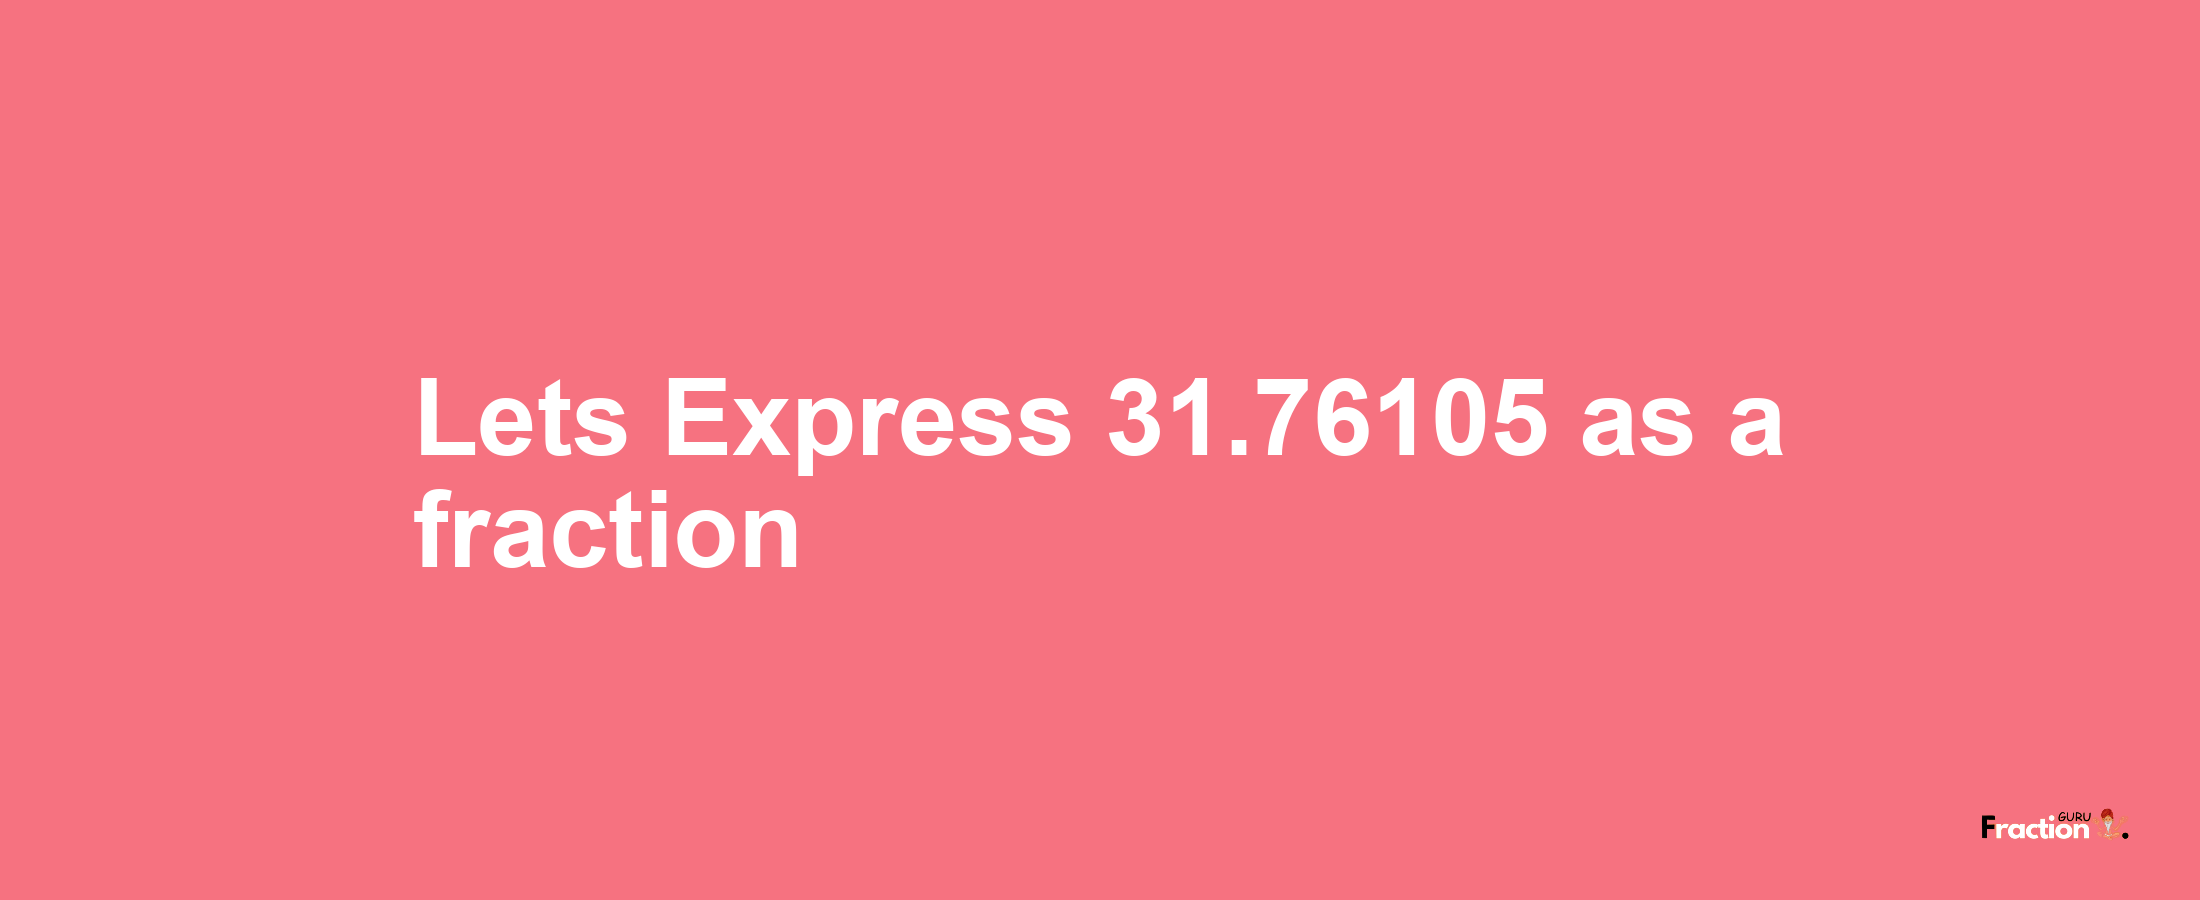 Lets Express 31.76105 as afraction